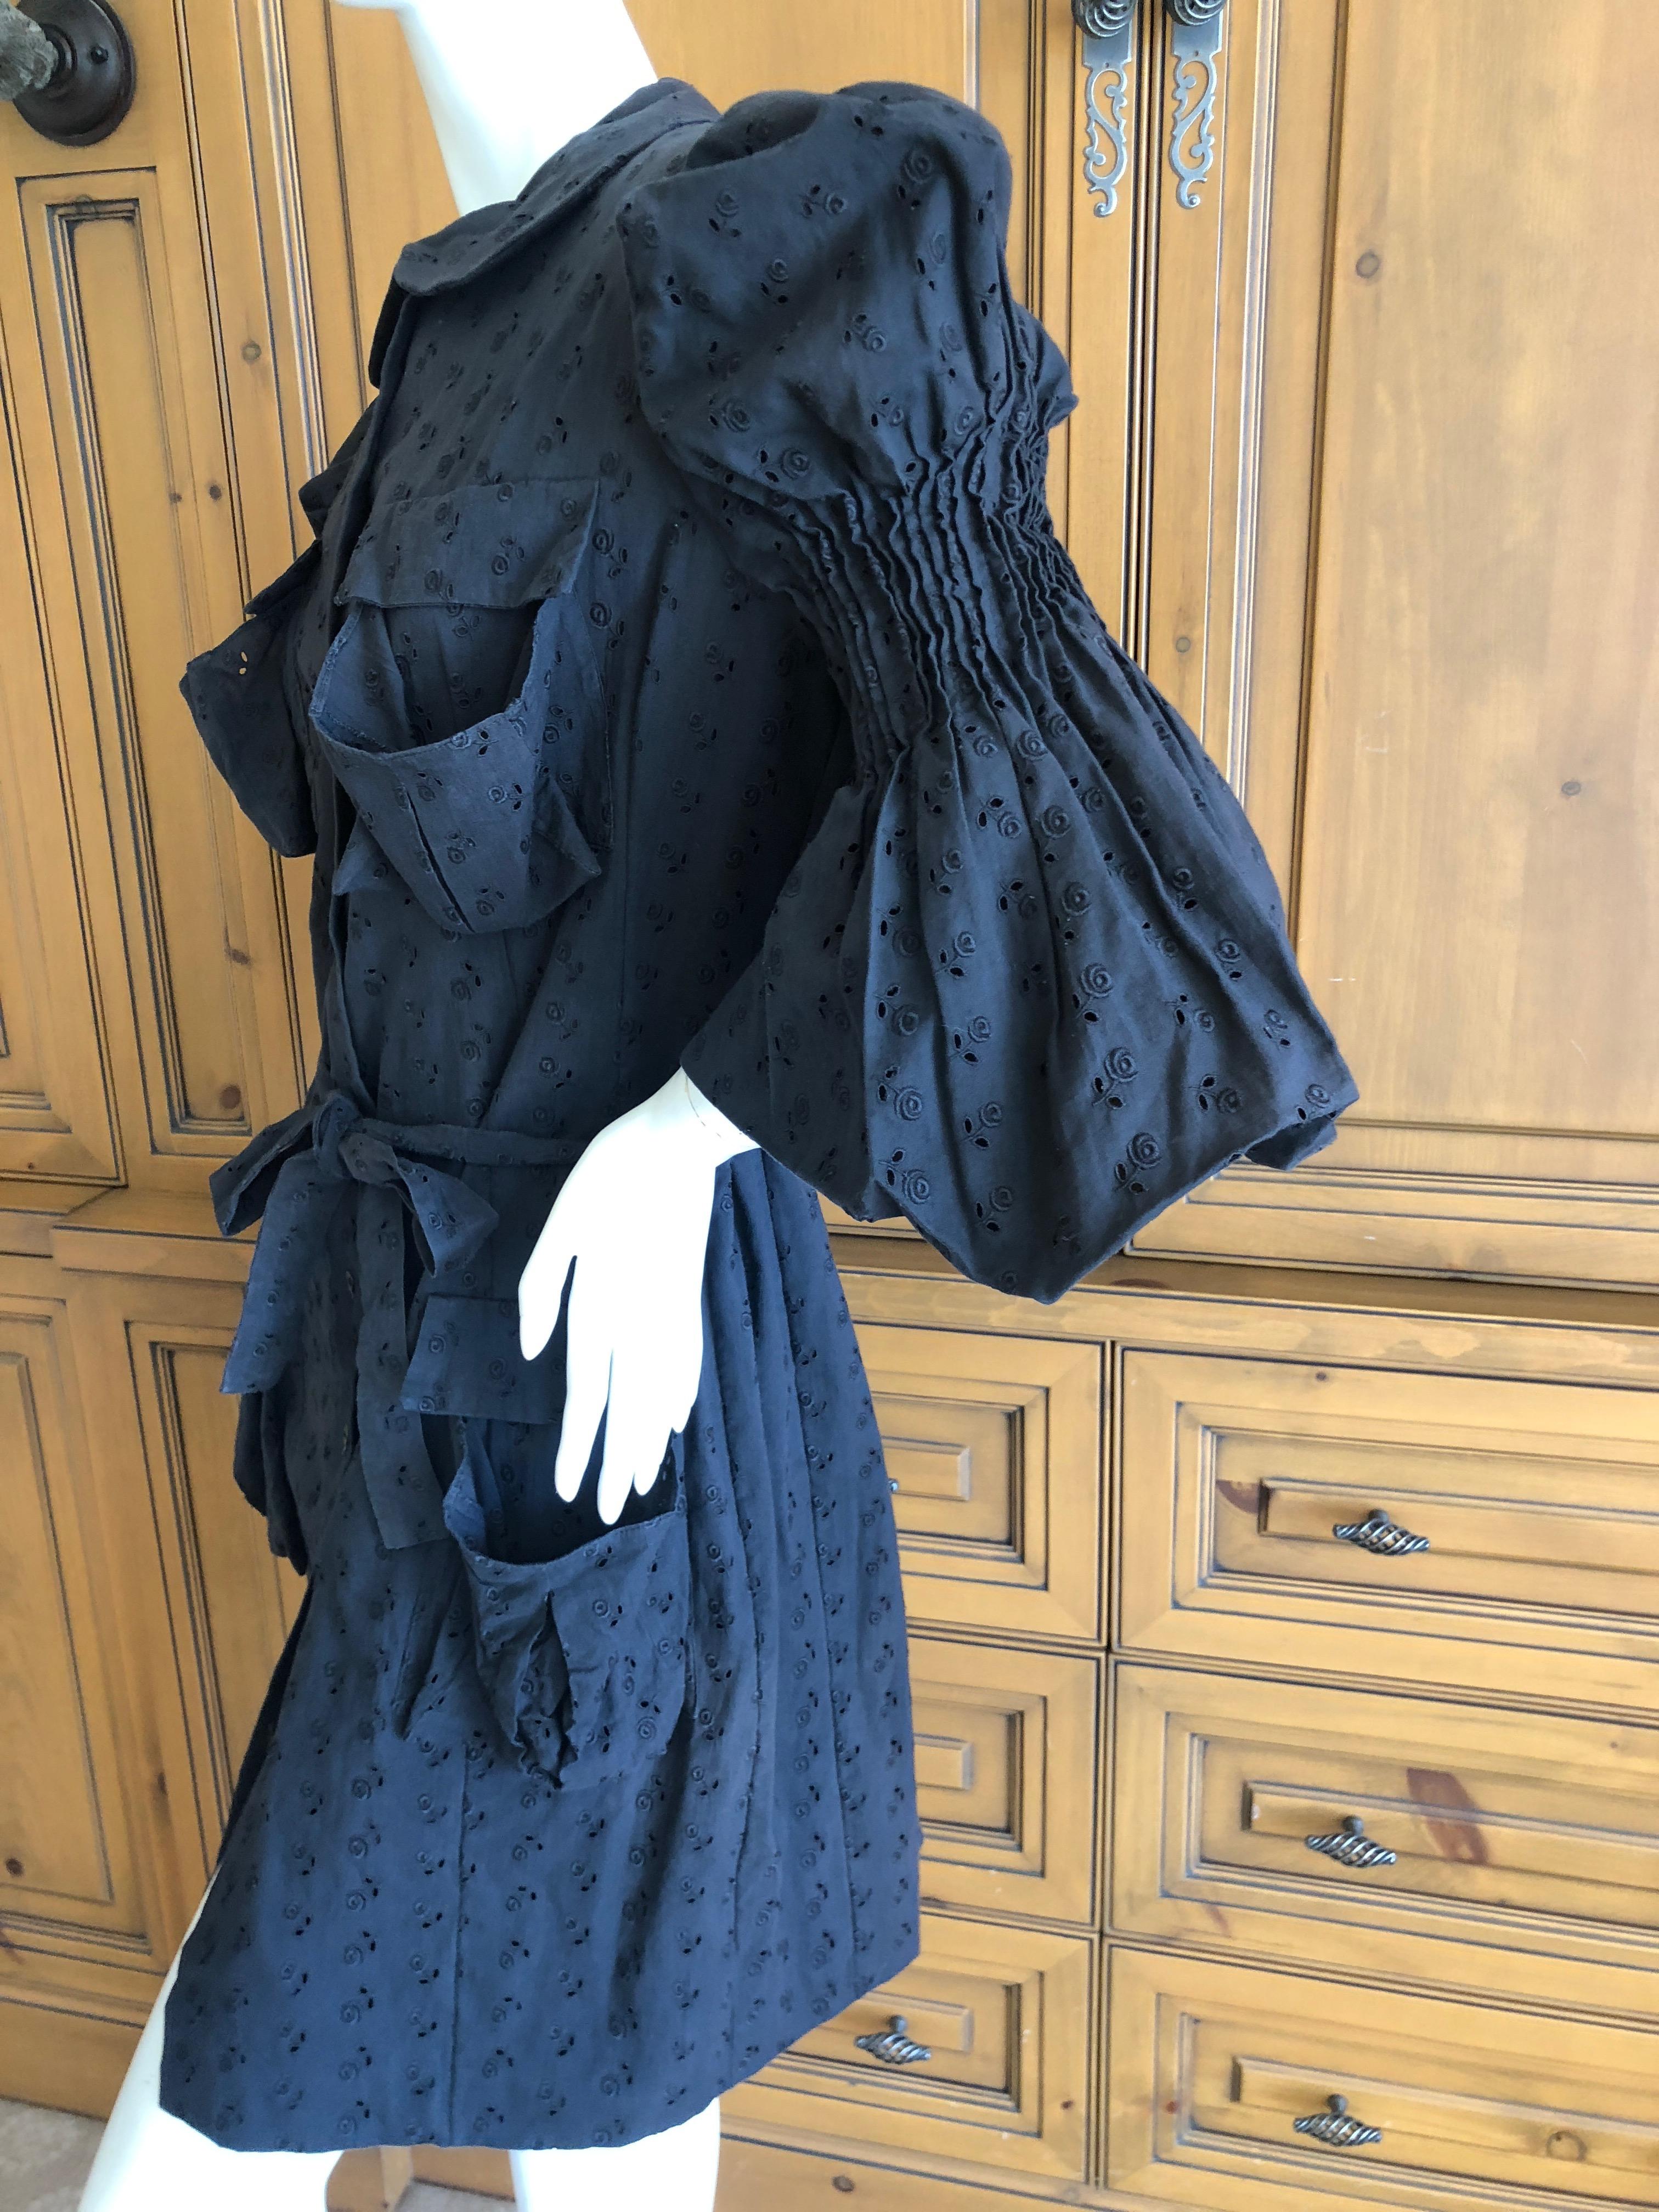  John Galliano 1998 Black Belted Cotton Eyelet Dress with Leg of Mutton Sleeves 3